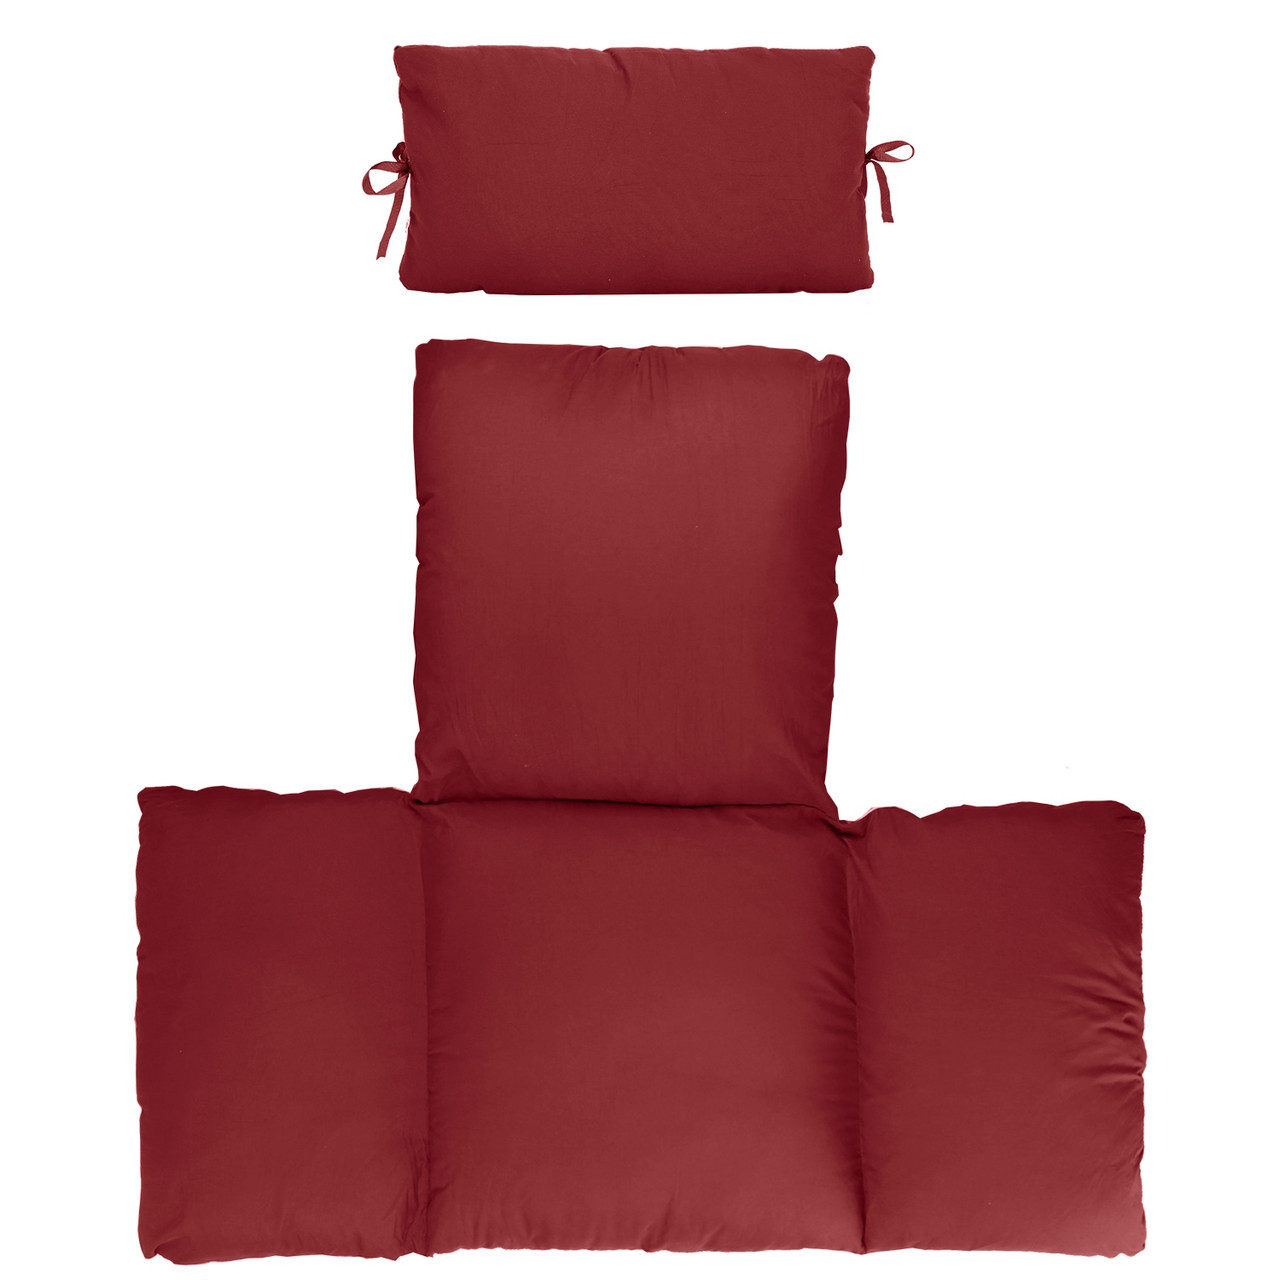 NewHome™ Hanging Basket Chair Cushion product image